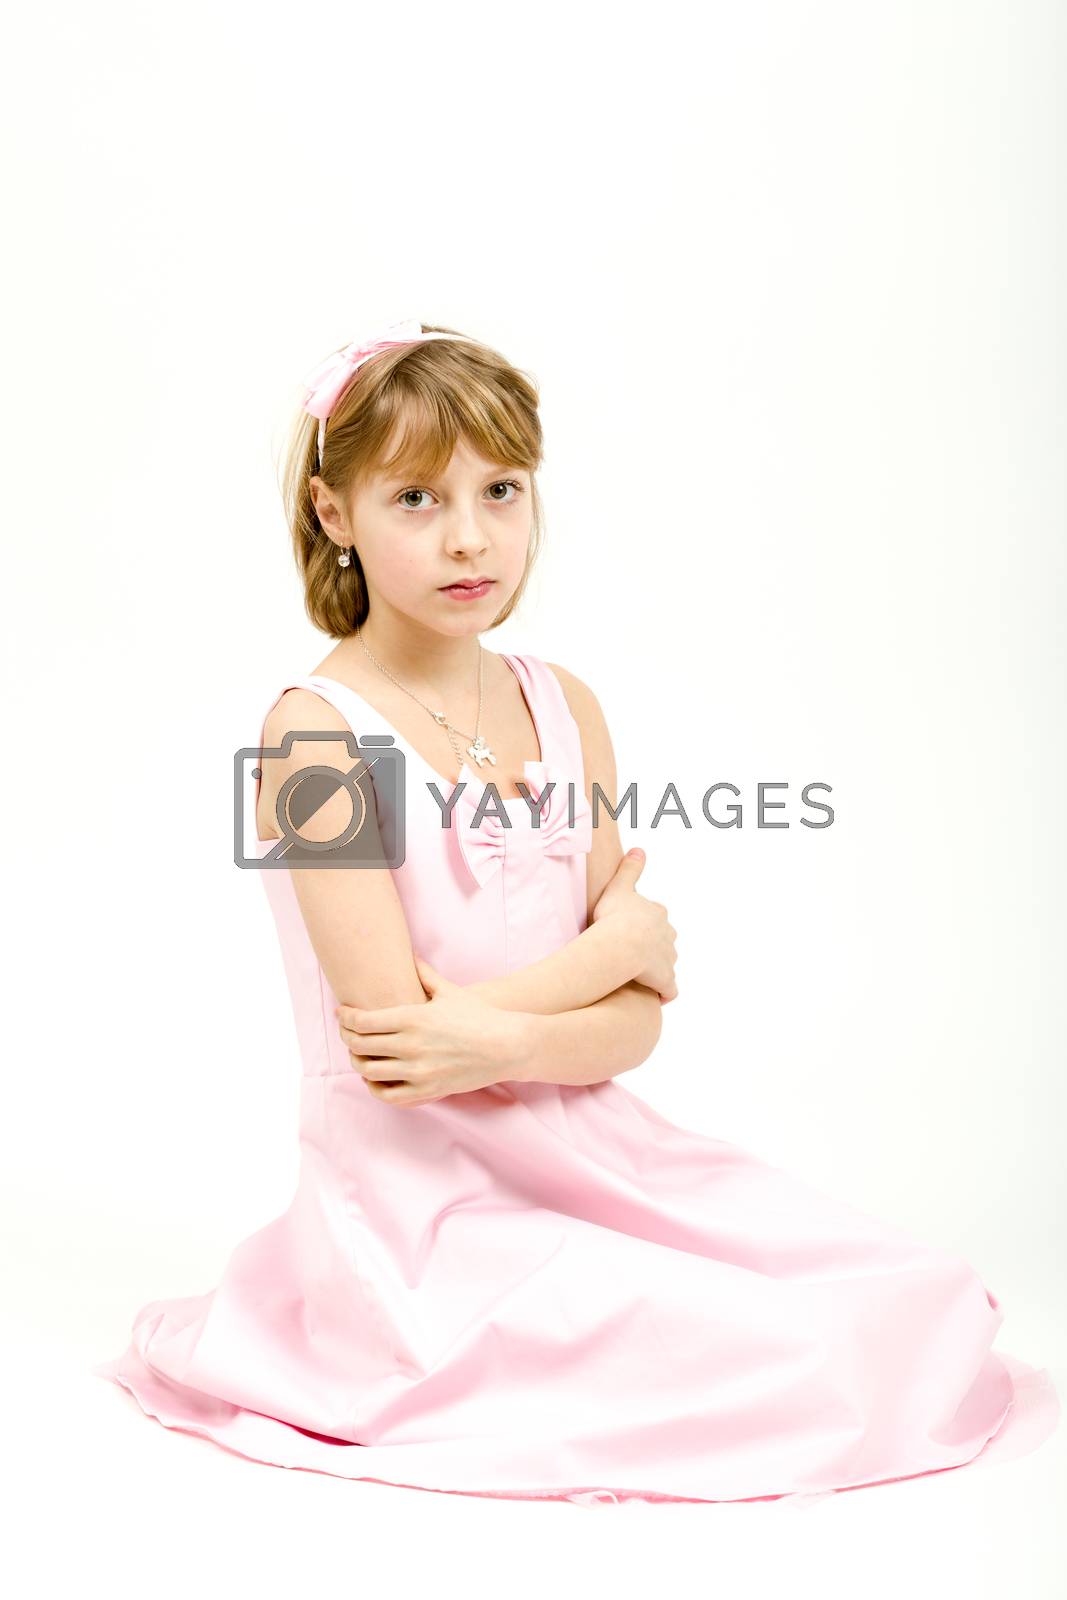 Royalty free image of Studio portrait of young beautiful girl by artush